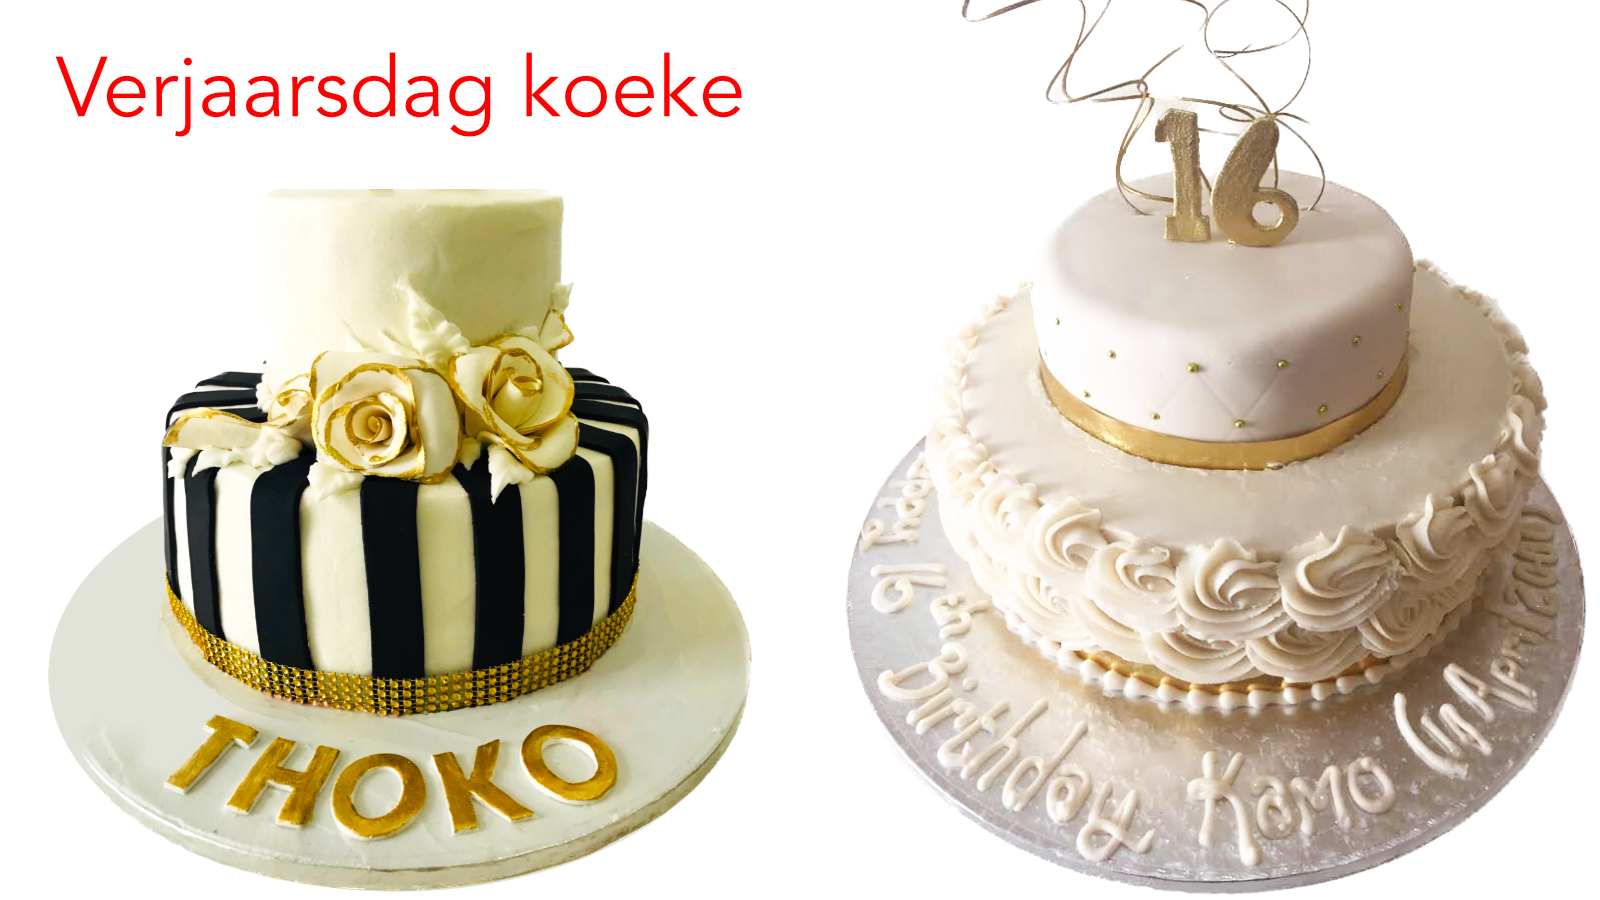 Afrikaans Banners 26.png